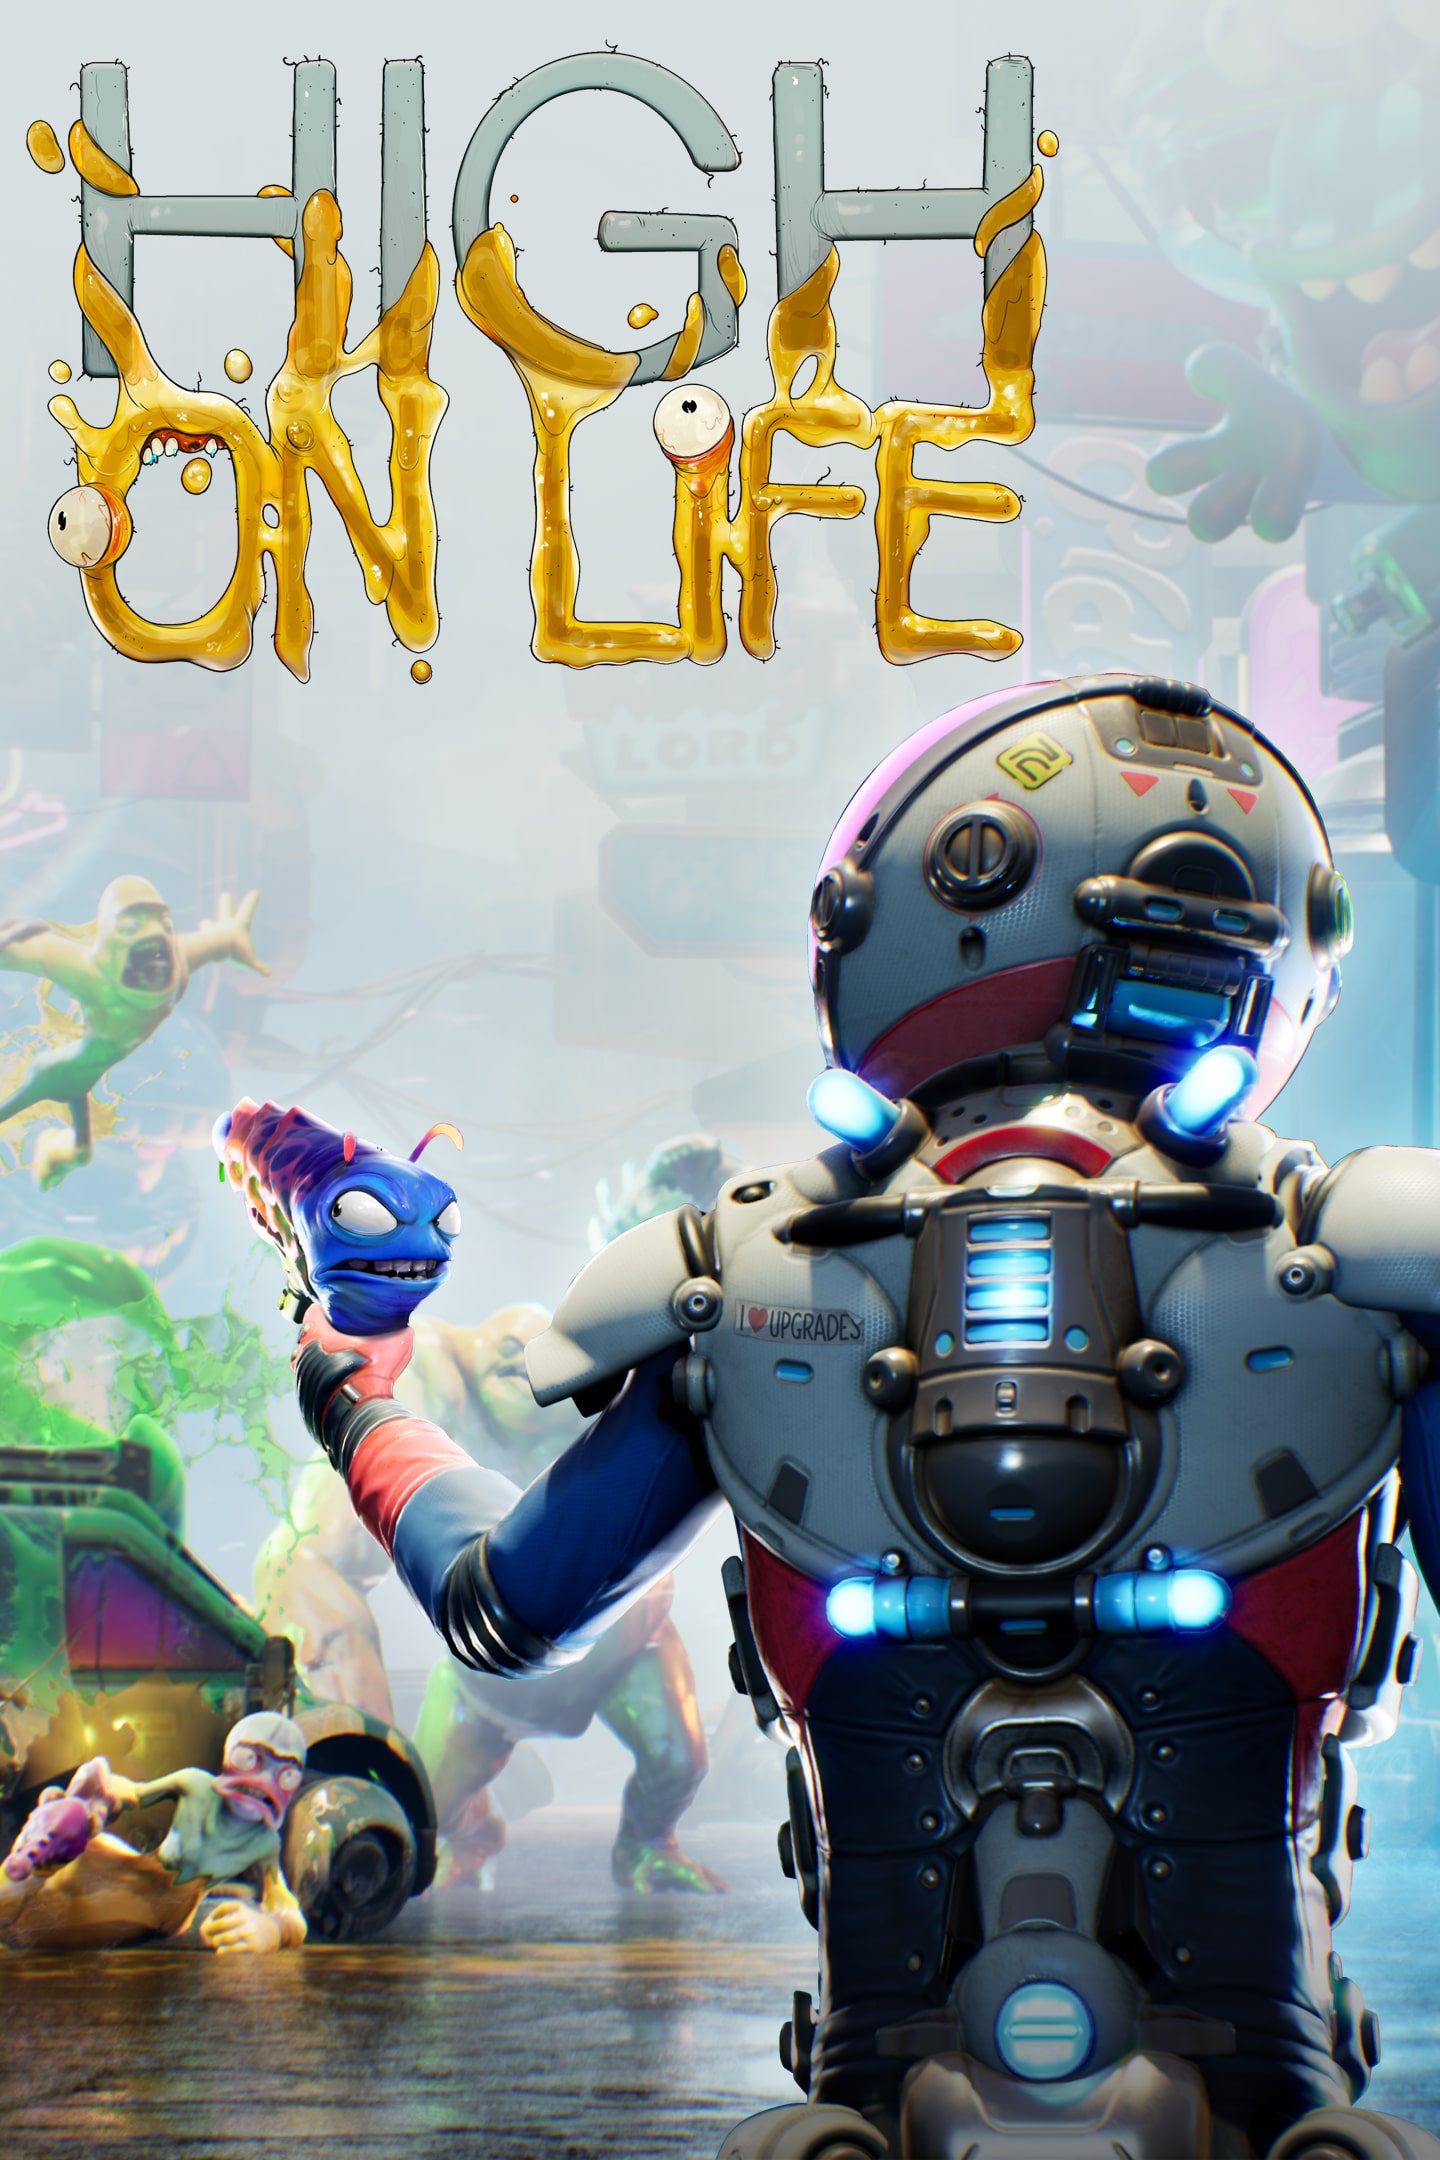 High on Life now available on PS4, PS5 along with PC, Steam, Xbox. Know how  to buy, pricing details - The Economic Times